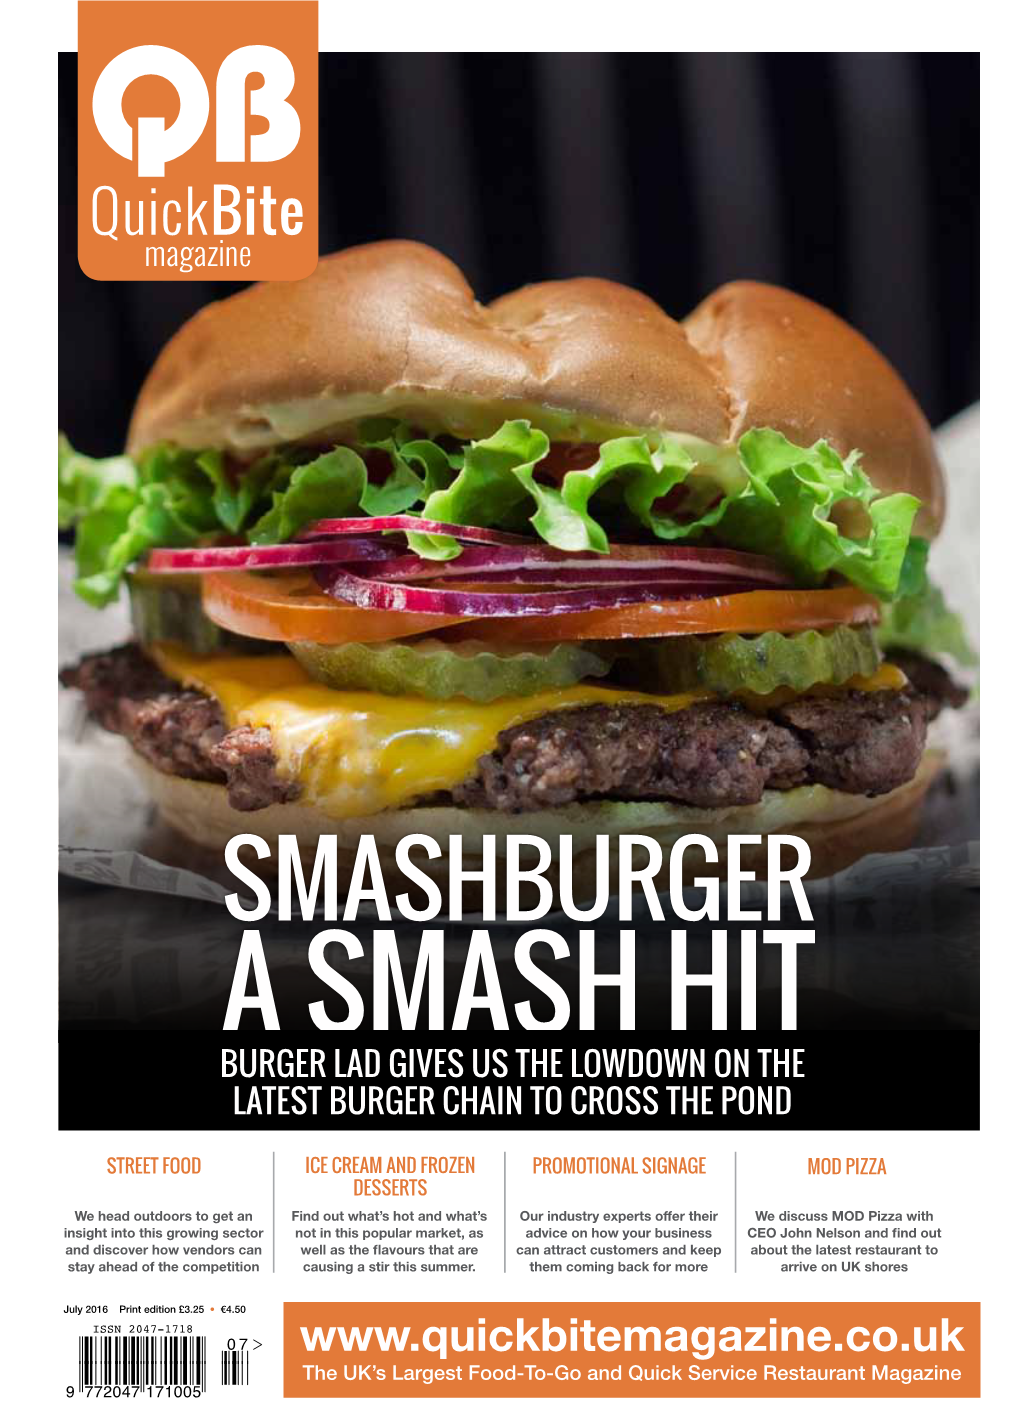 Smashburger a Smash Hit Burger Lad Gives Us the Lowdown on the Latest Burger Chain to Cross the Pond